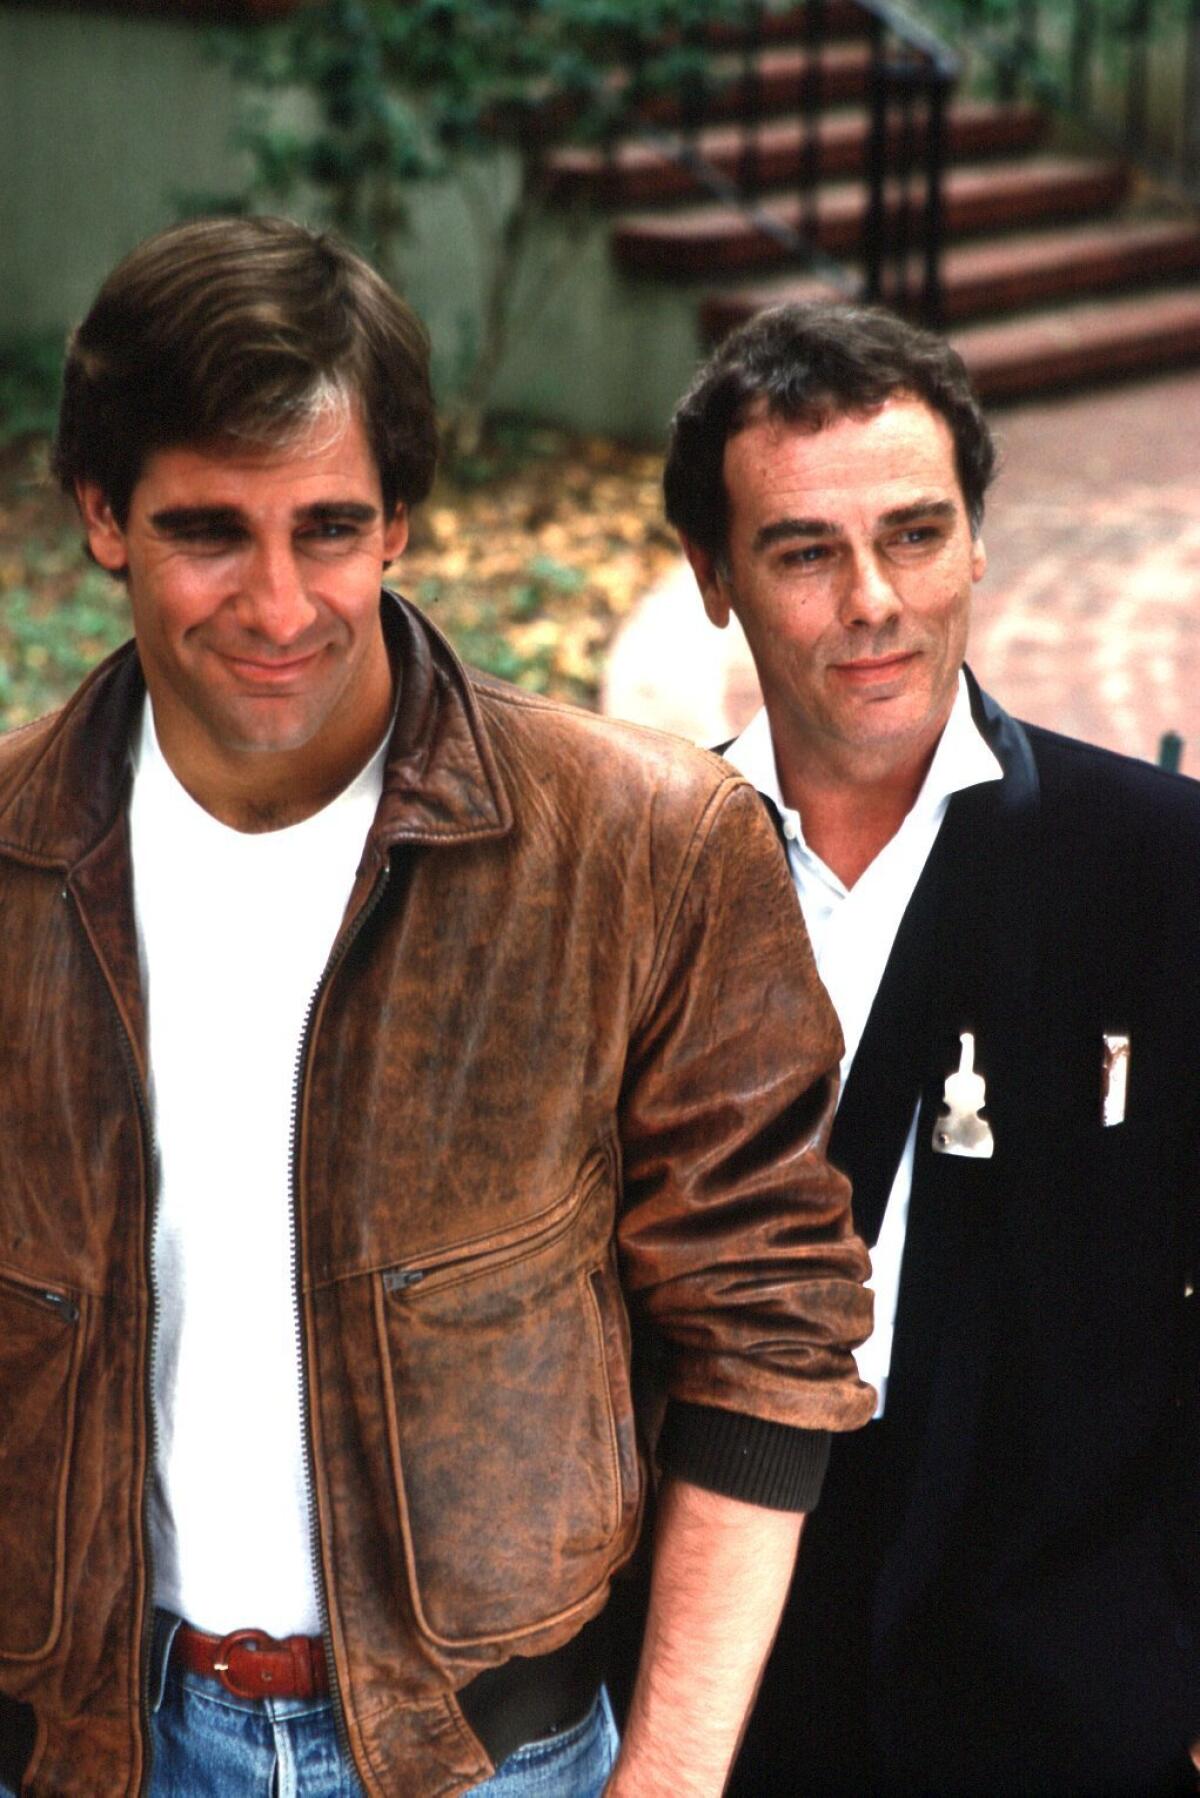 Dean Stockwell, right, and Scott Bakula in the TV series "Quantum Leap" 